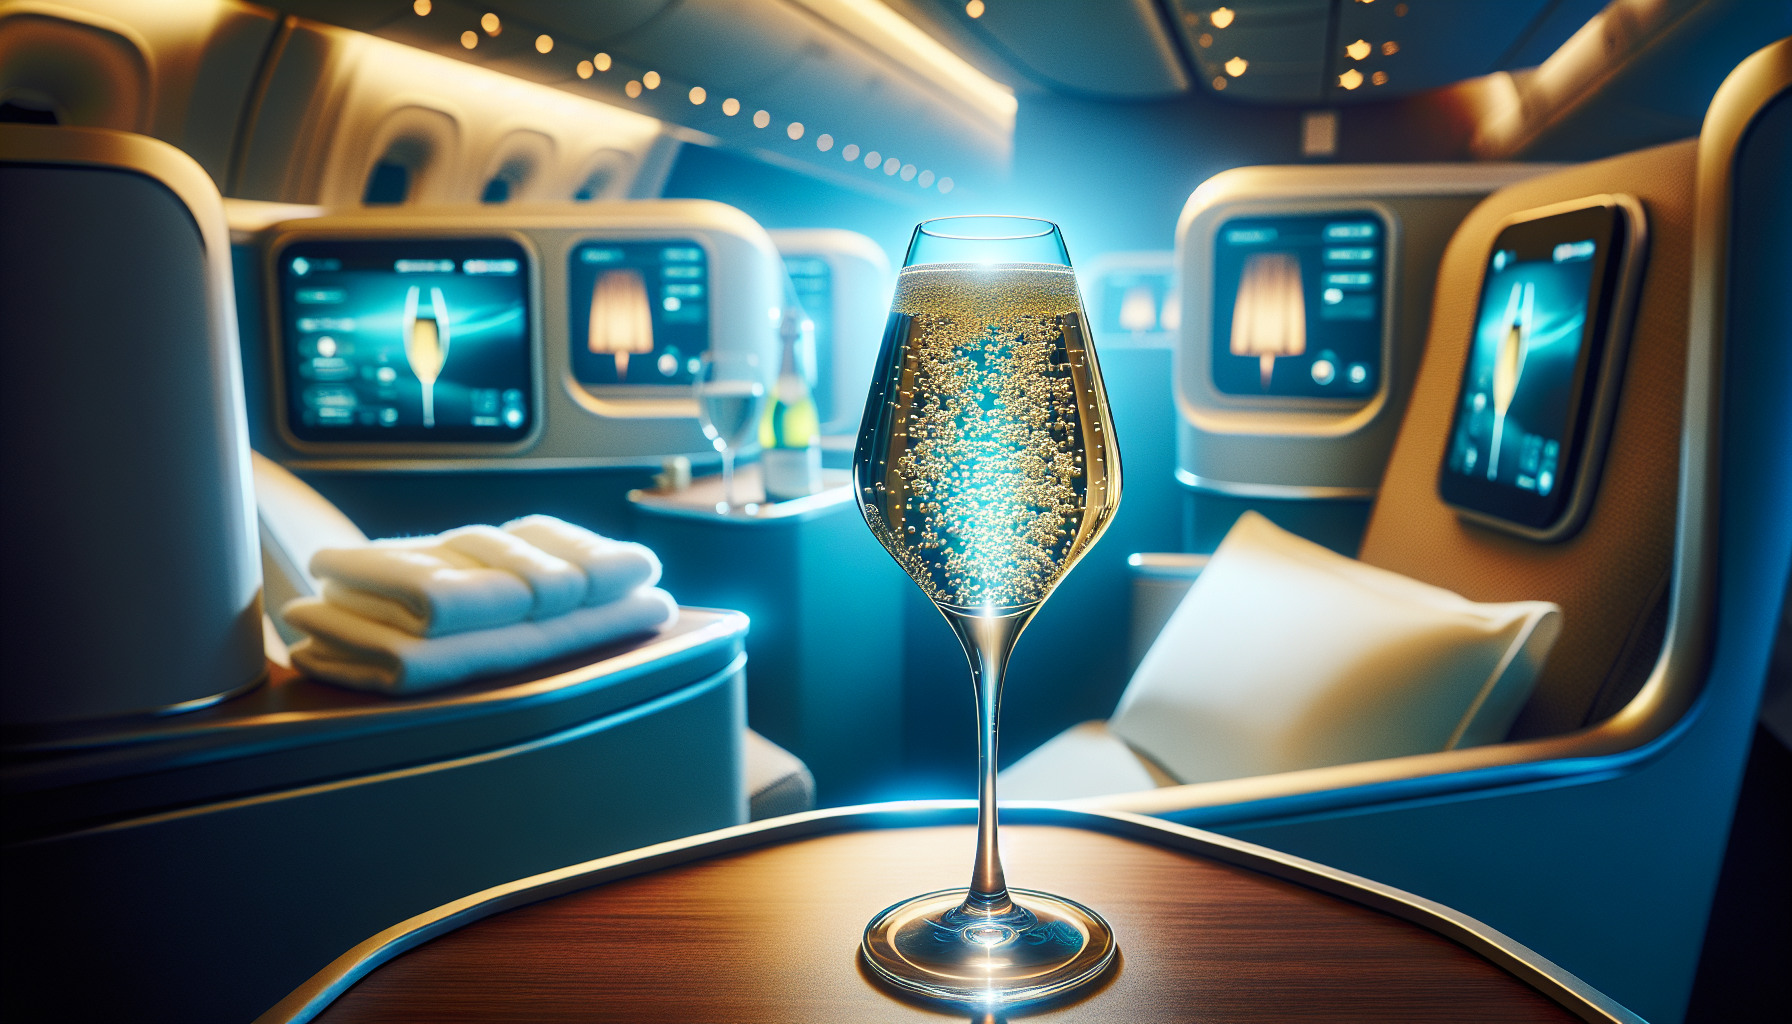 Flying AeroMexico’s Boeing 787 Business Class Experience on the Dreamliner